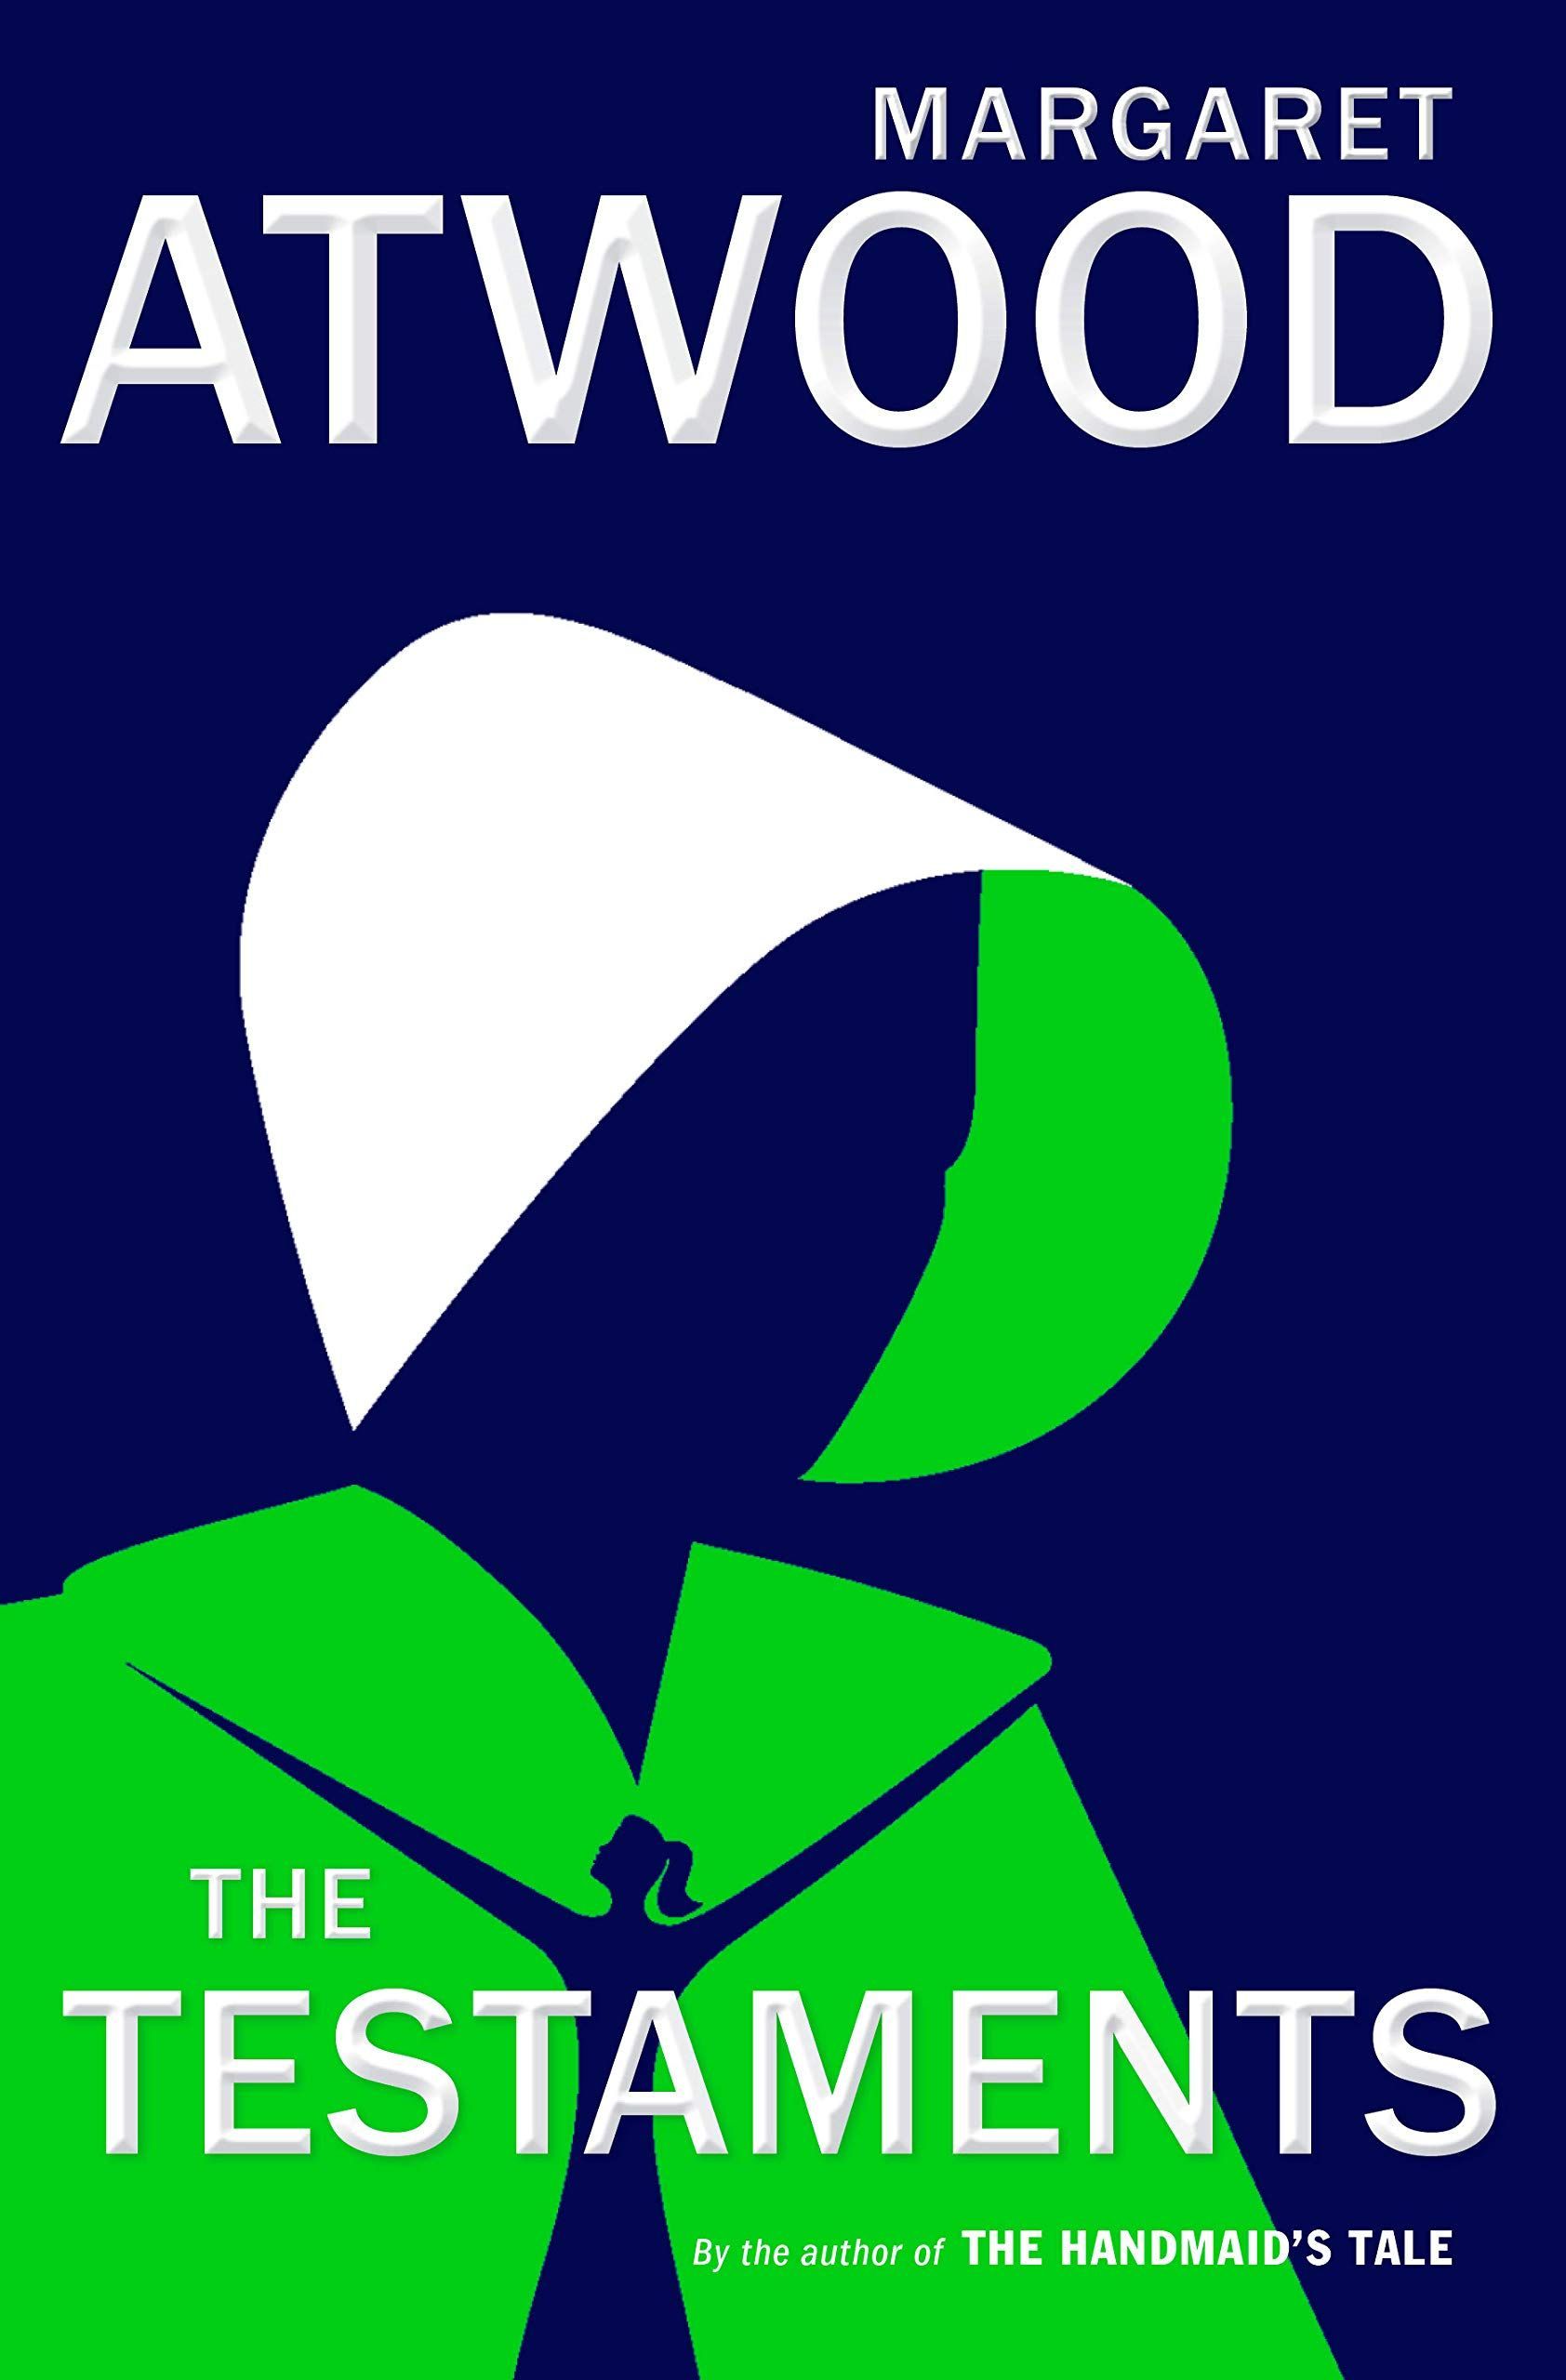 The Importance of Stories: On Margaret Atwood’s “The Testaments”